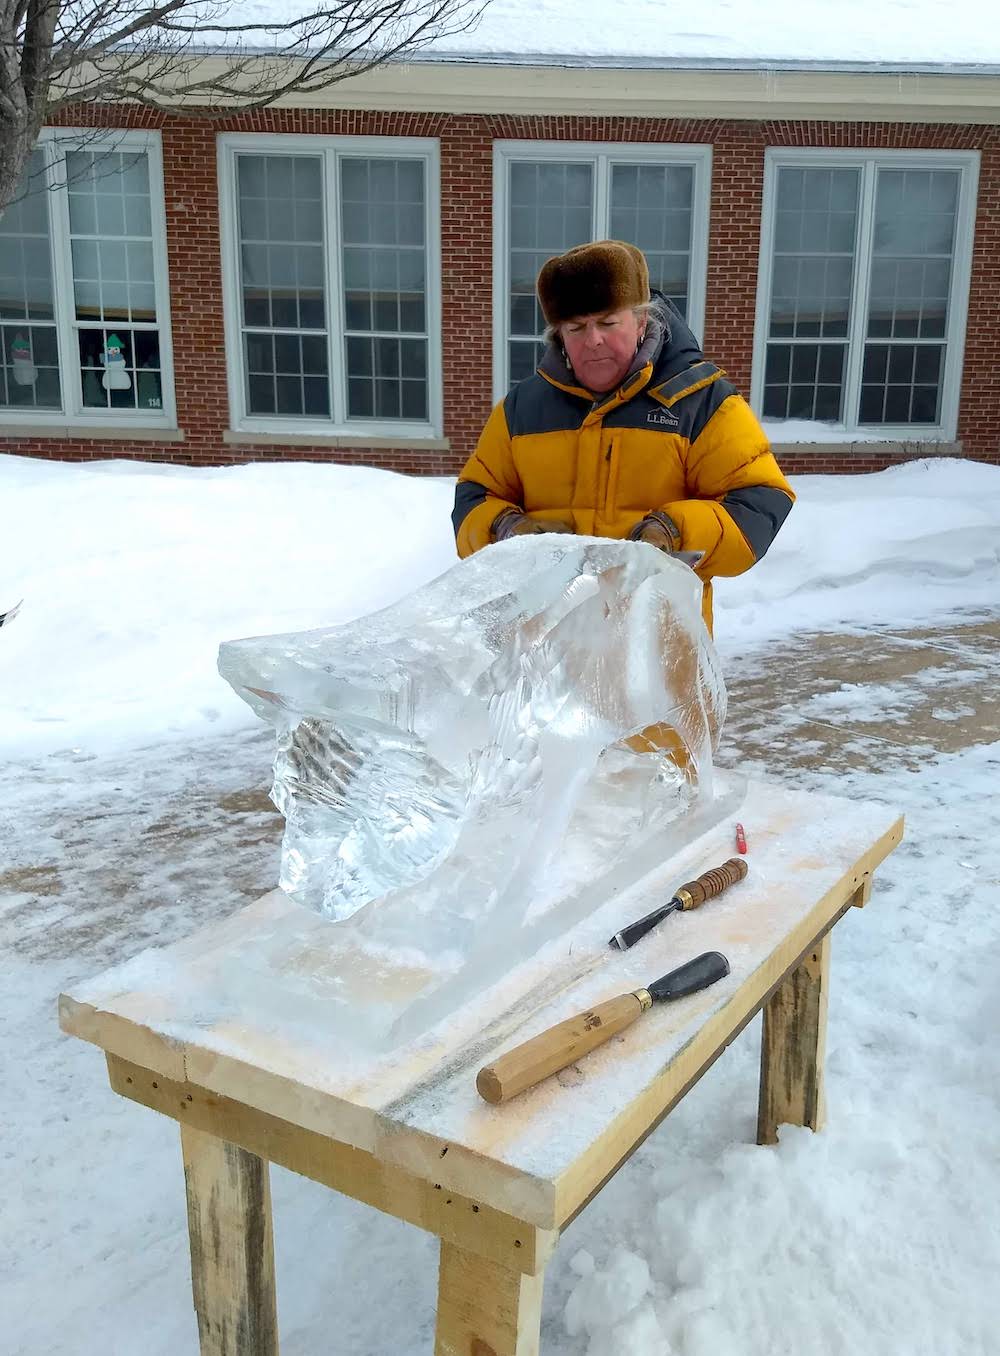 An early stage of the ice carving